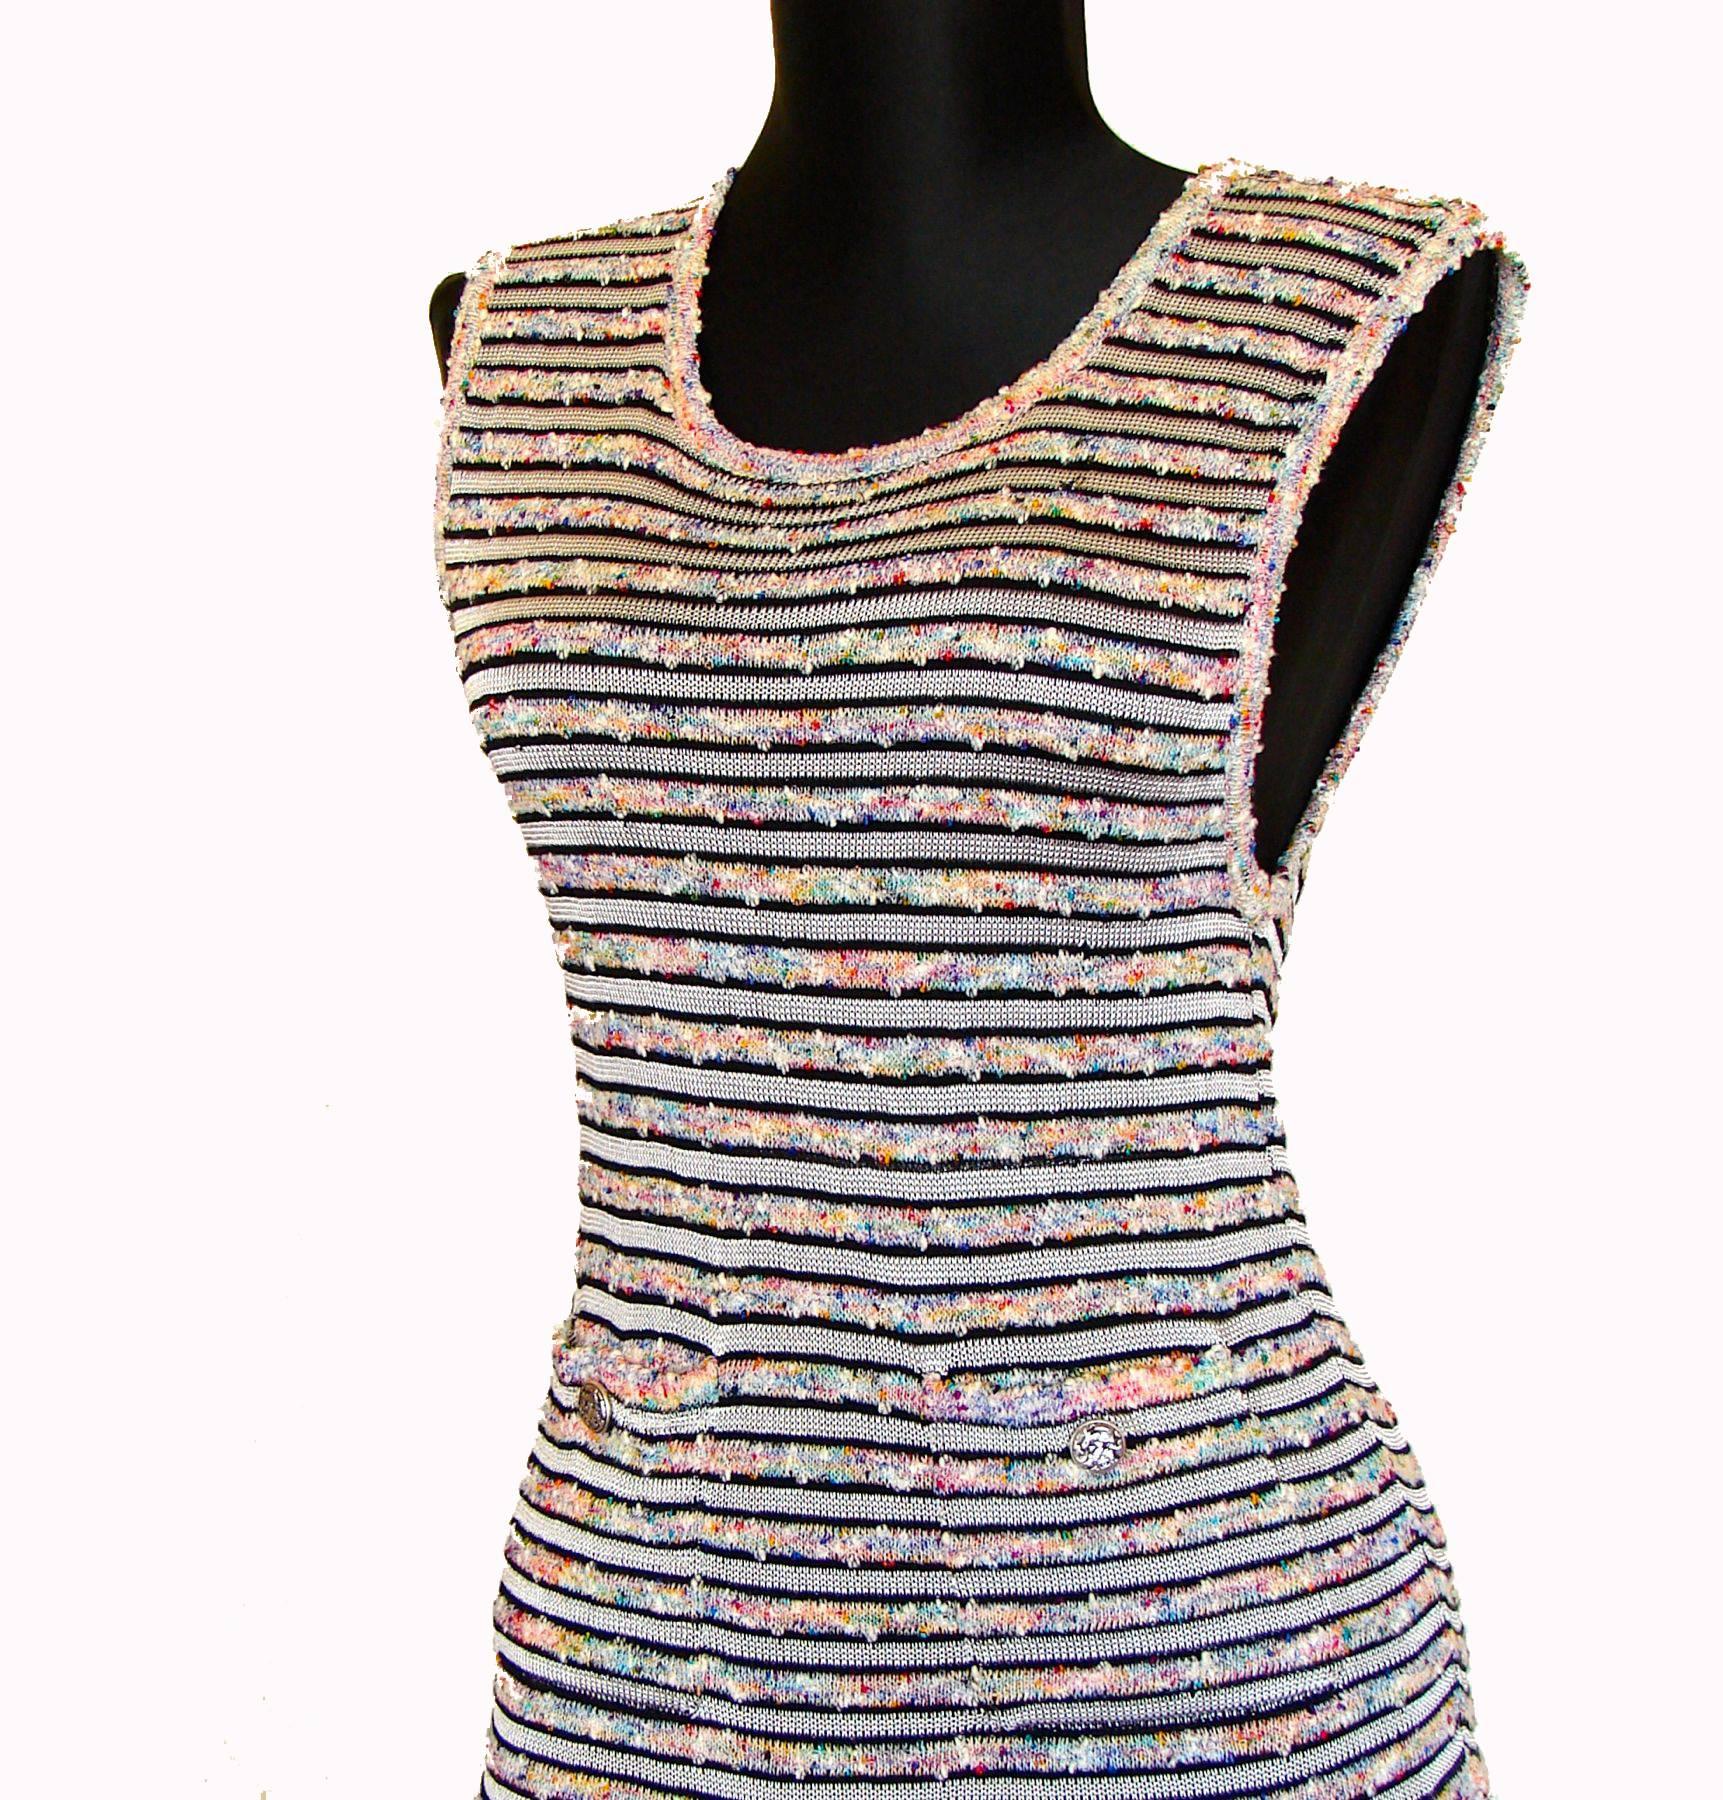 This fabulous dress is from Chanel's 2011 collection.  Made from a gorgeous knit in ecru, it features black stripes and alternating strips of rainbow boucle wool.  It has two pockets in front with silver CC logo buttons and a dropped waist.  Looks